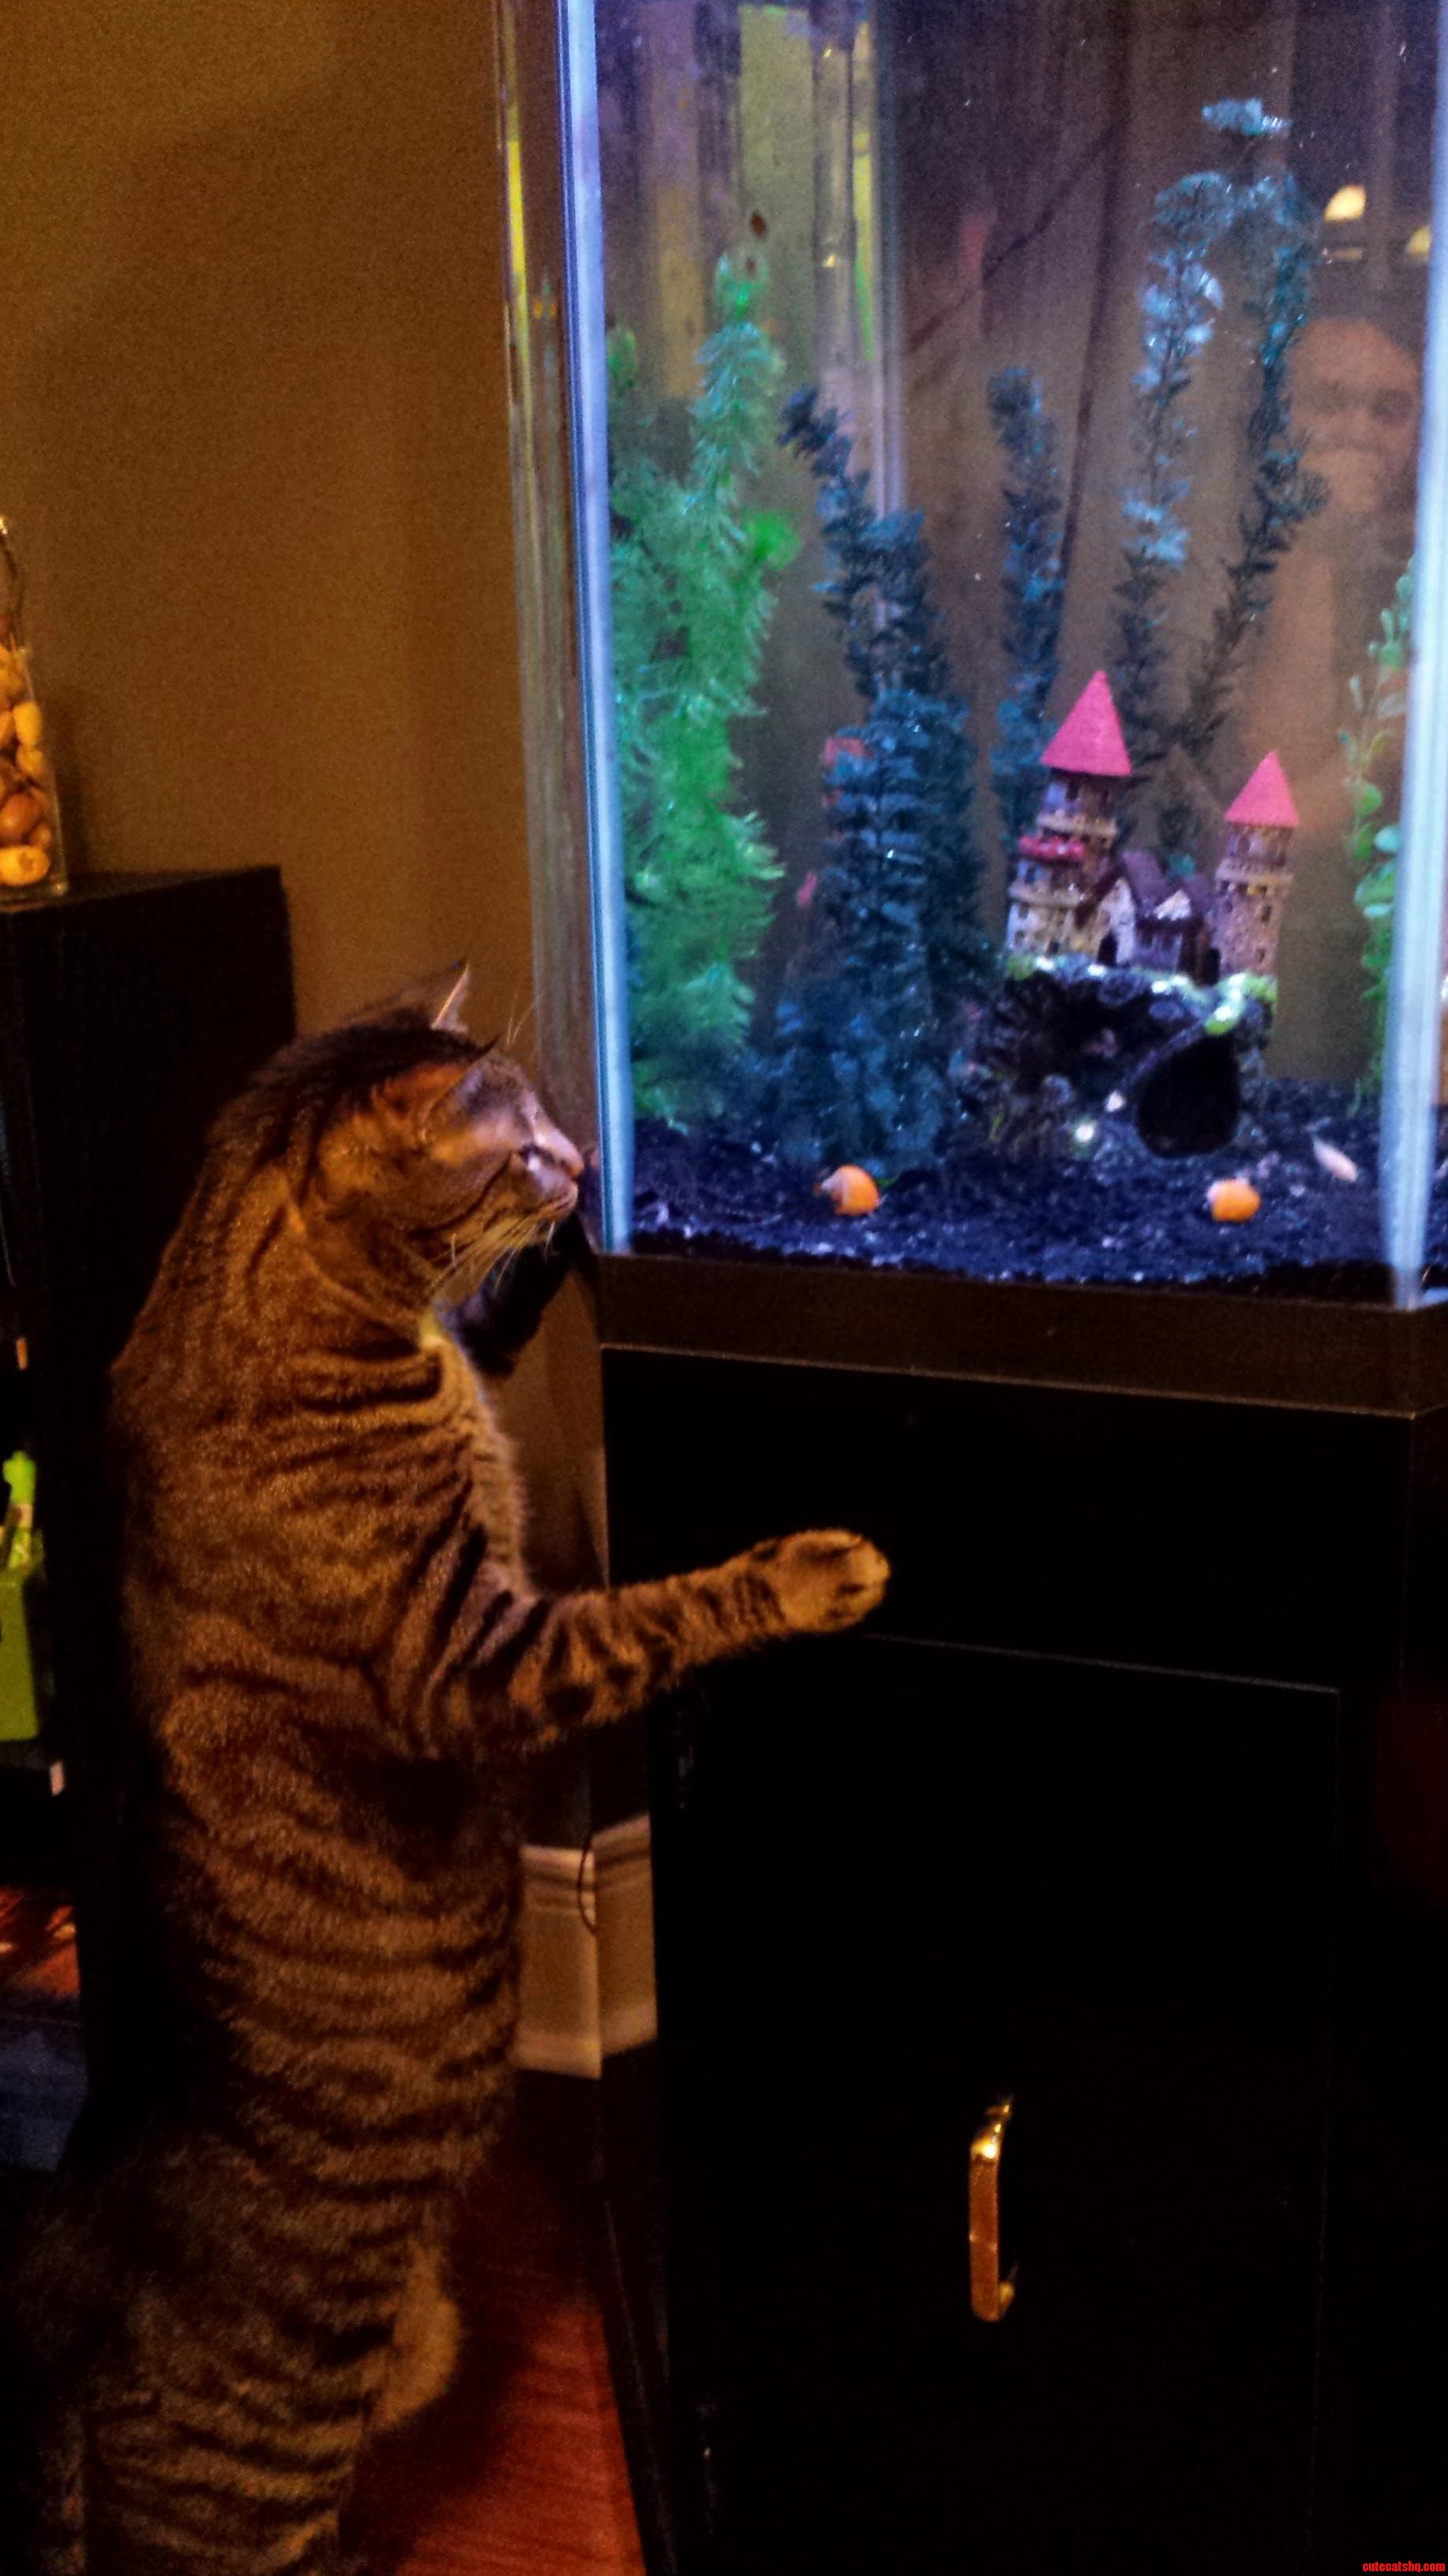 Calvyn is a big fan of our new fishies